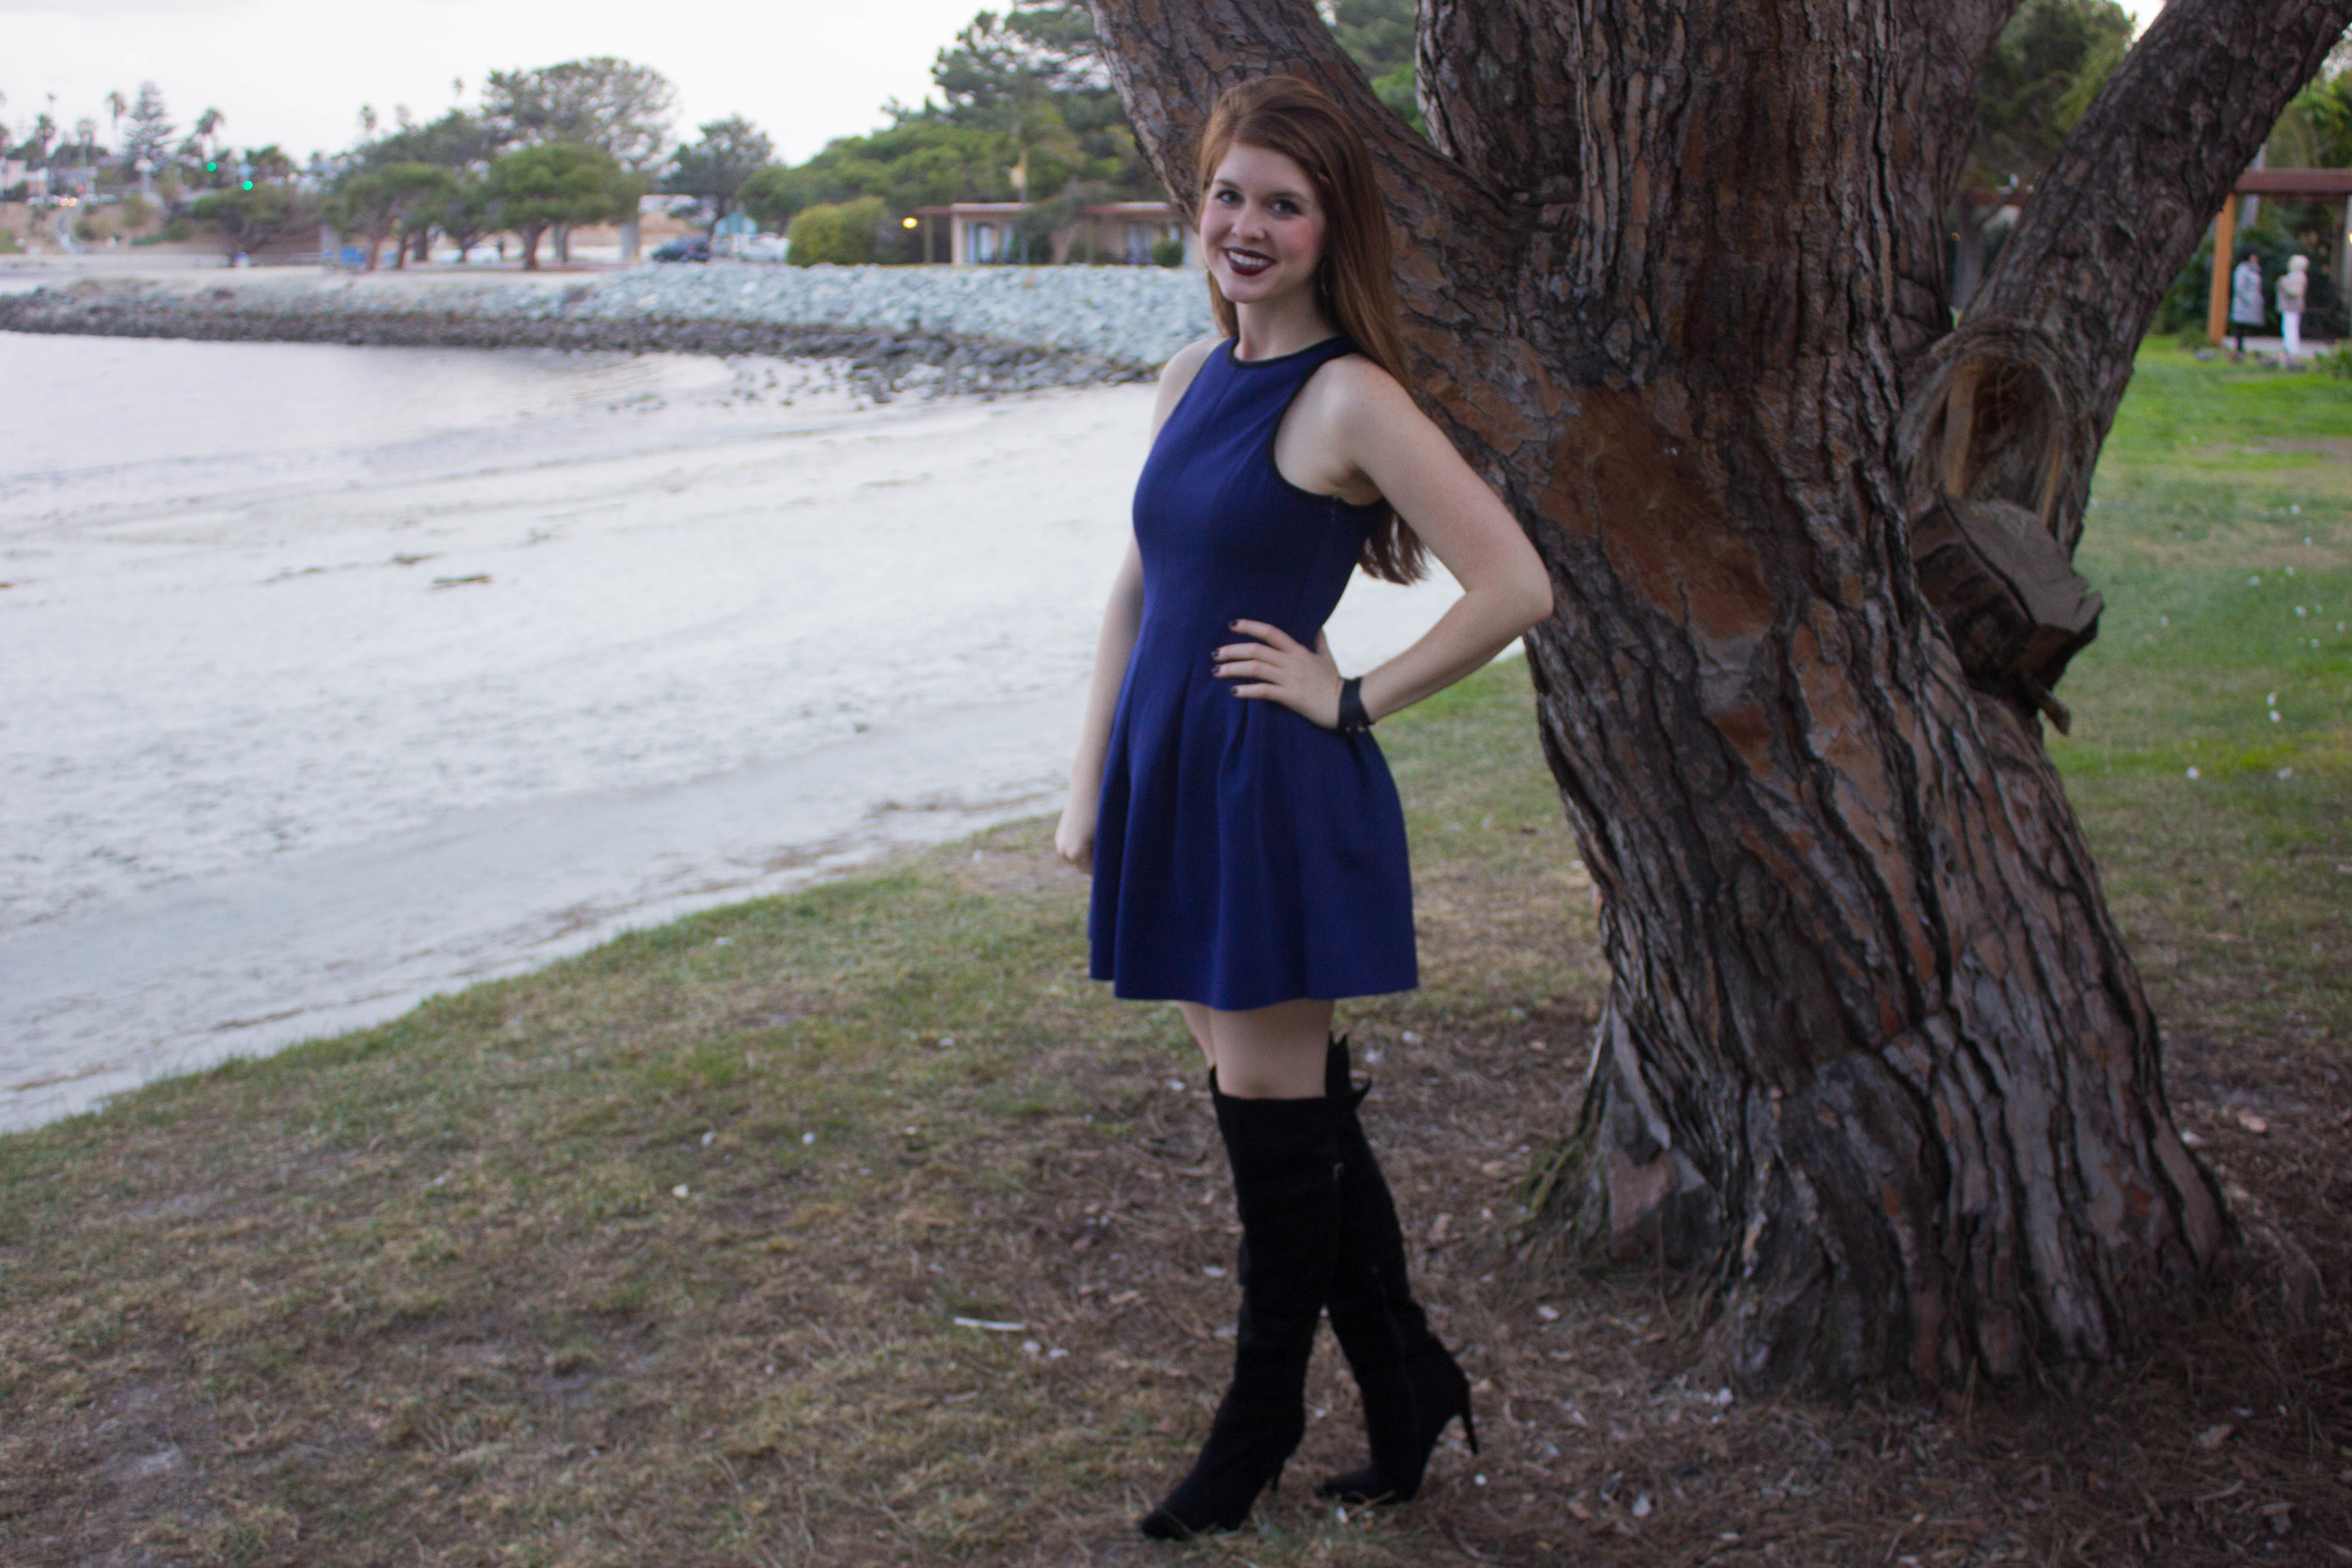 chinese laundrey over the knee boots, navy scuba dress, nyx lipstick